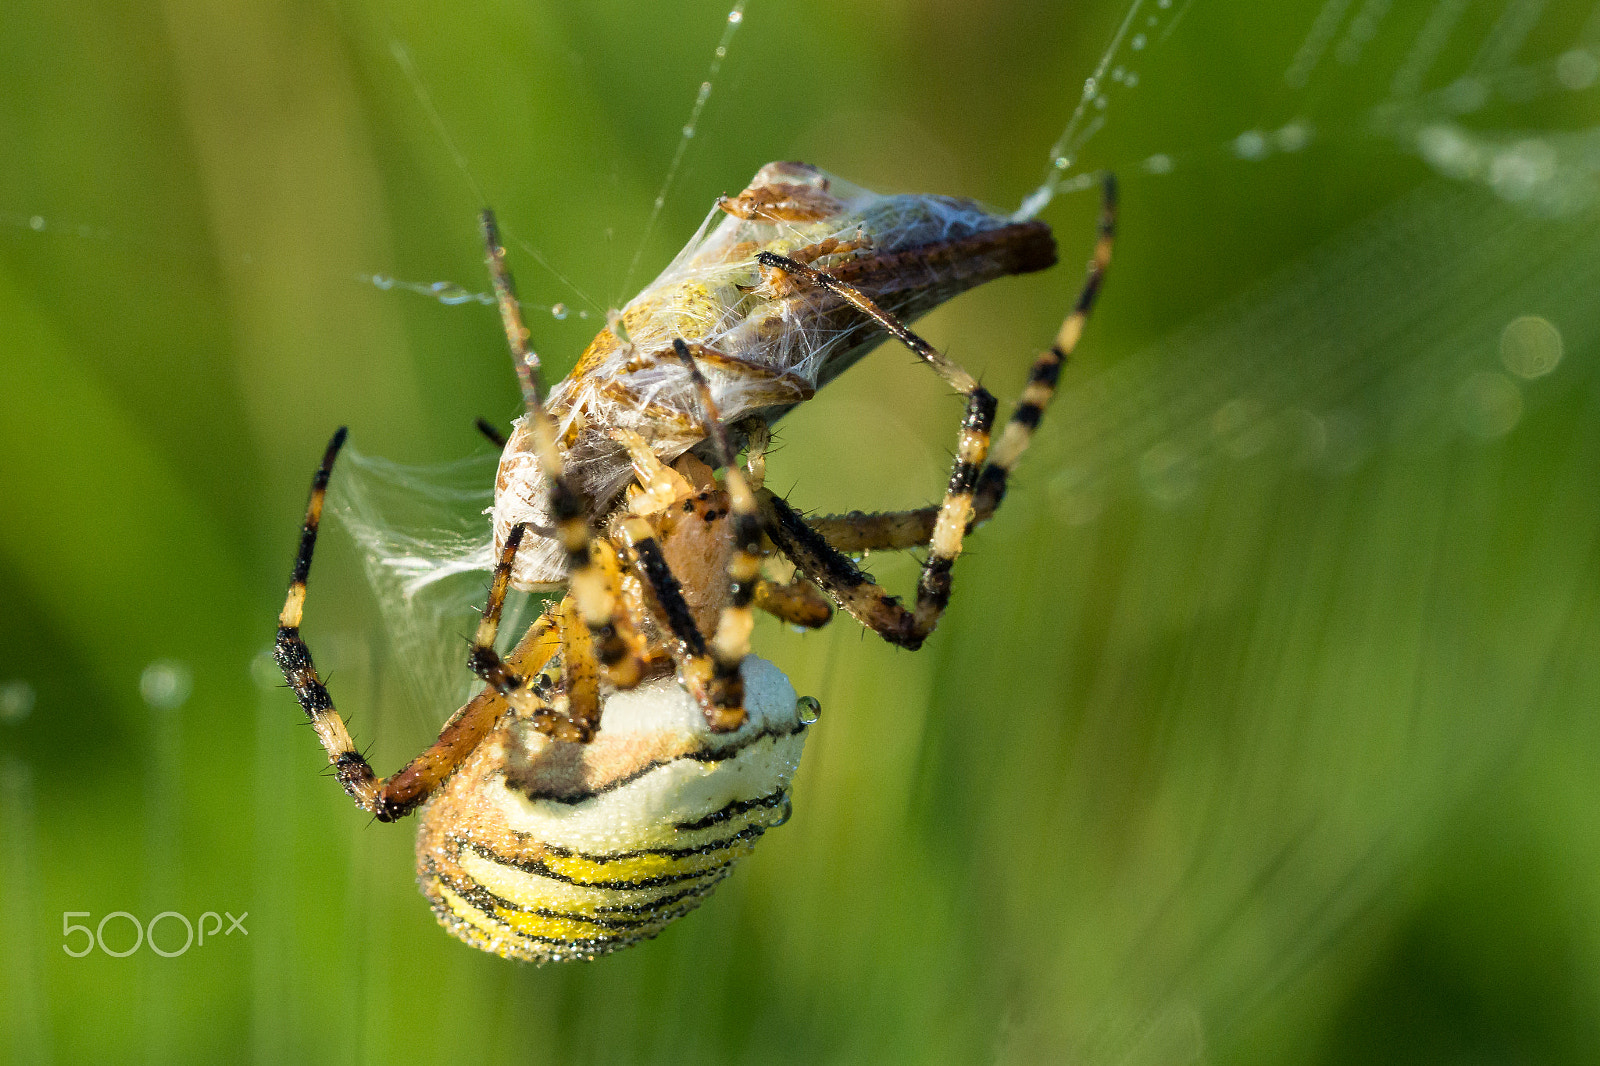 Sony a6000 sample photo. Wasp spider with prey photography